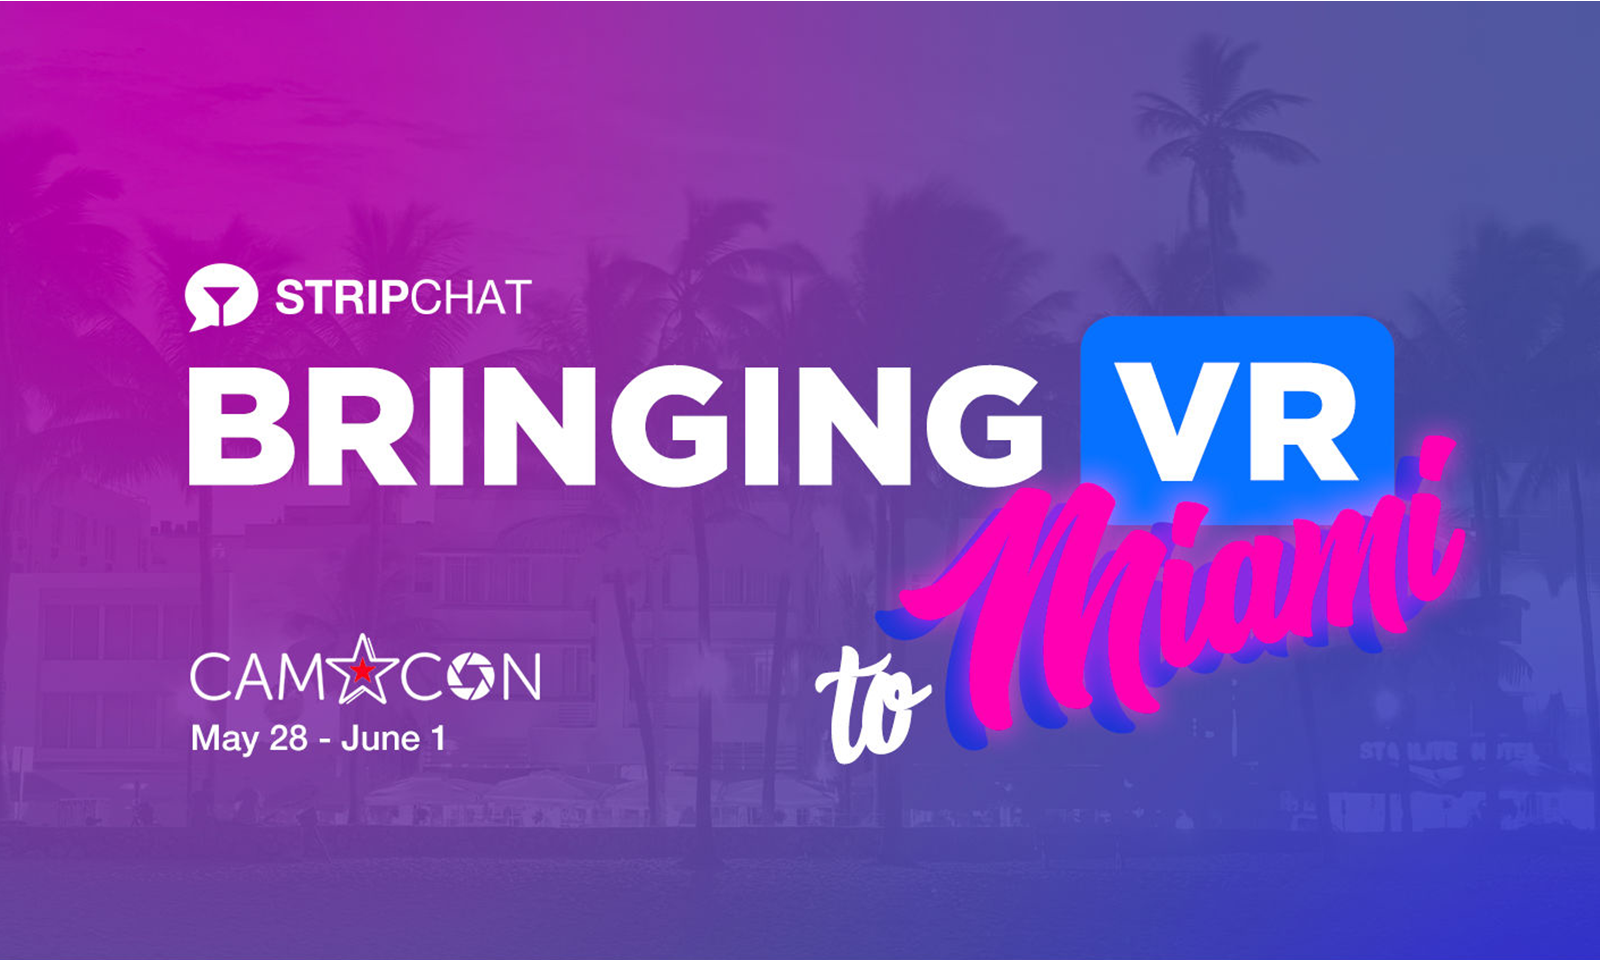 Stripchat Will Feature Models in VR at CamCon in Miami